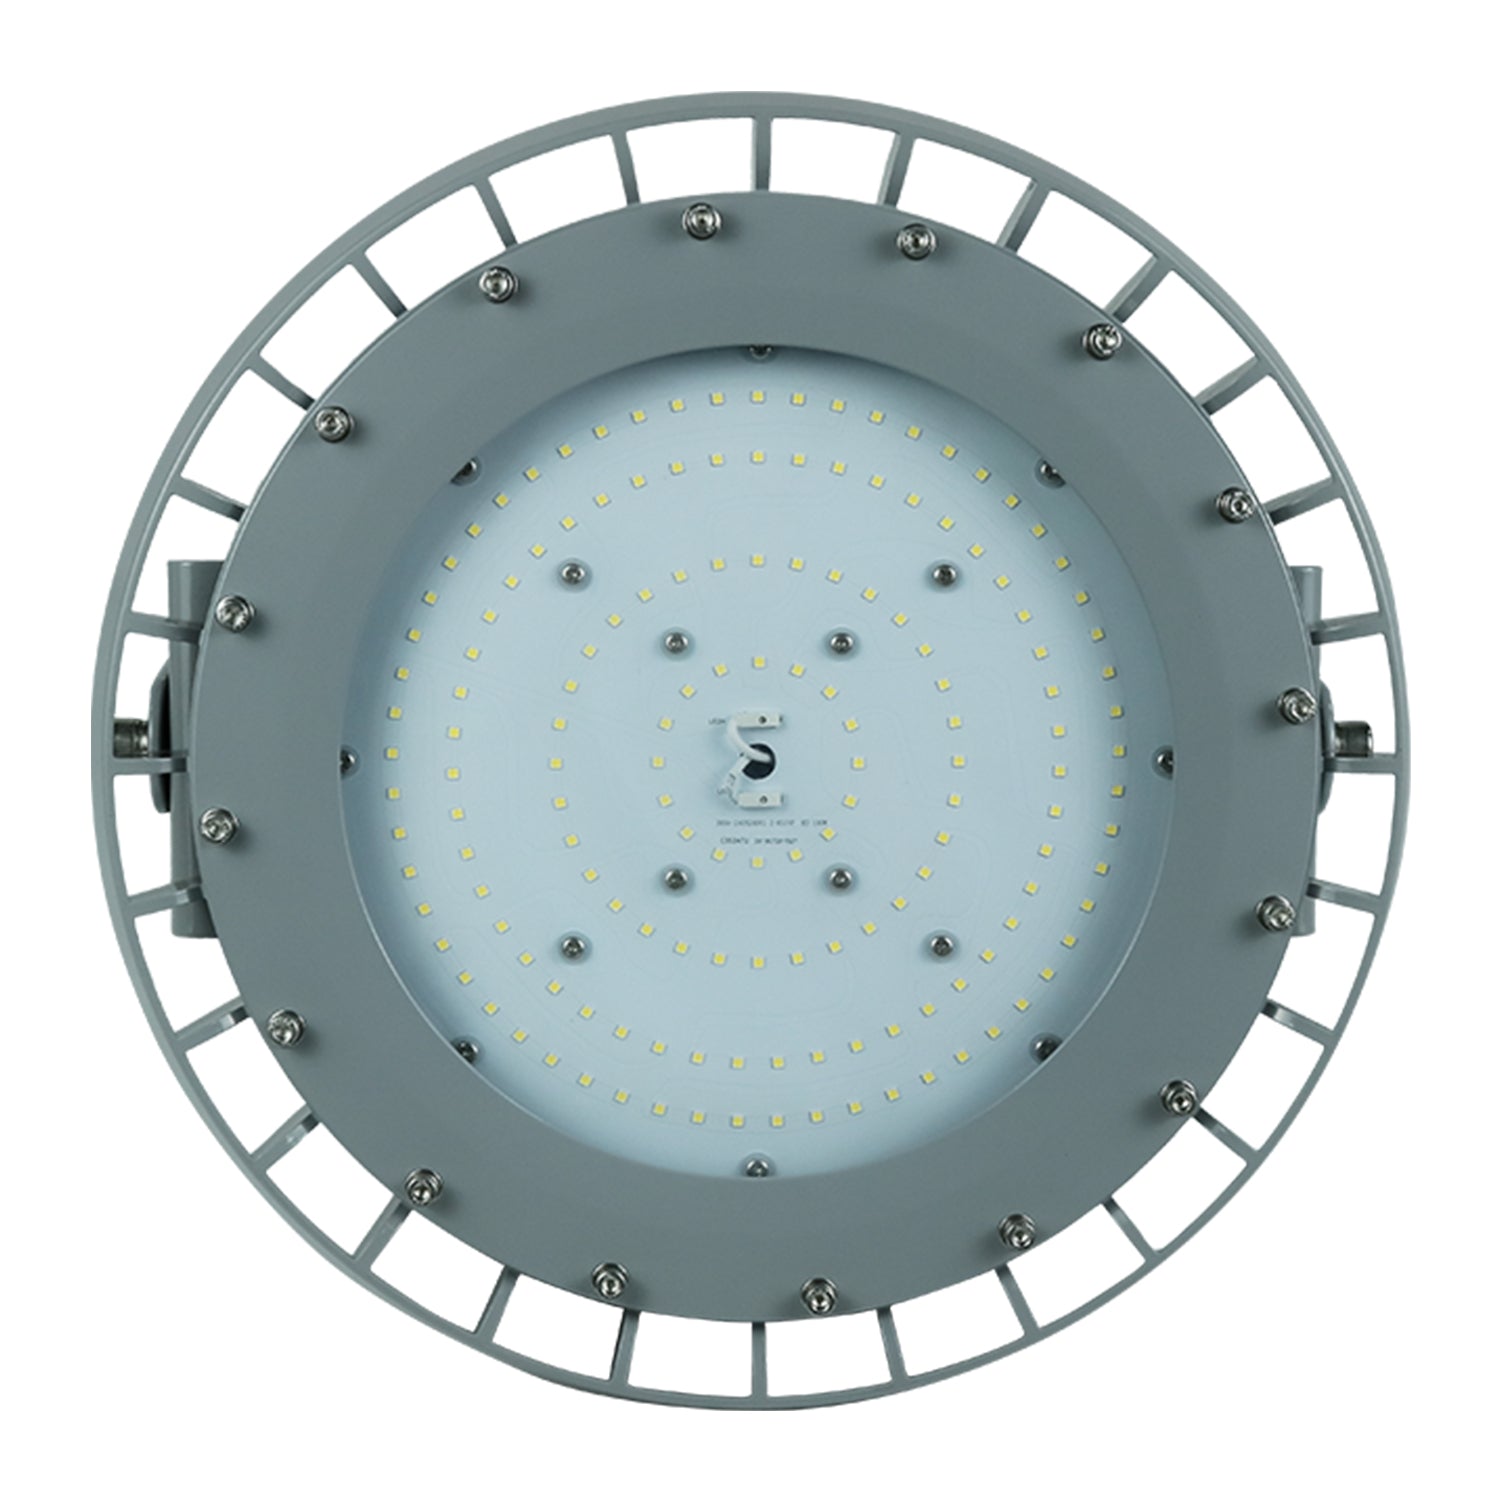 400 Watt LED Explosion Proof Round High Bay Light, B Series, Dimmable, 5000K, 56000LM, AC100-277V, IP66, Ideal for Oil & Gas Refineries, Drilling Rigs, Petrochemical Facilities